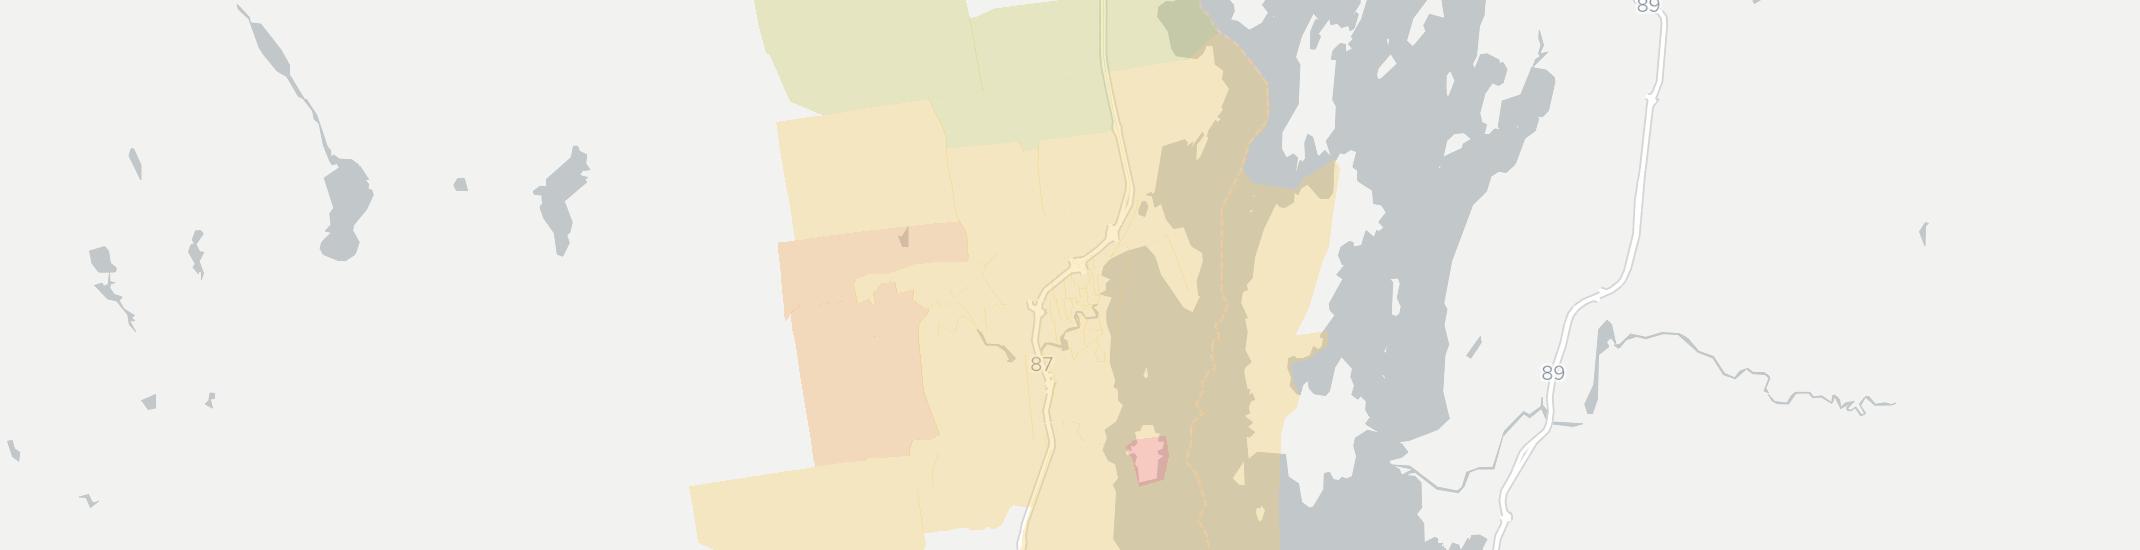 Plattsburgh Internet Competition Map. Click for interactive map.